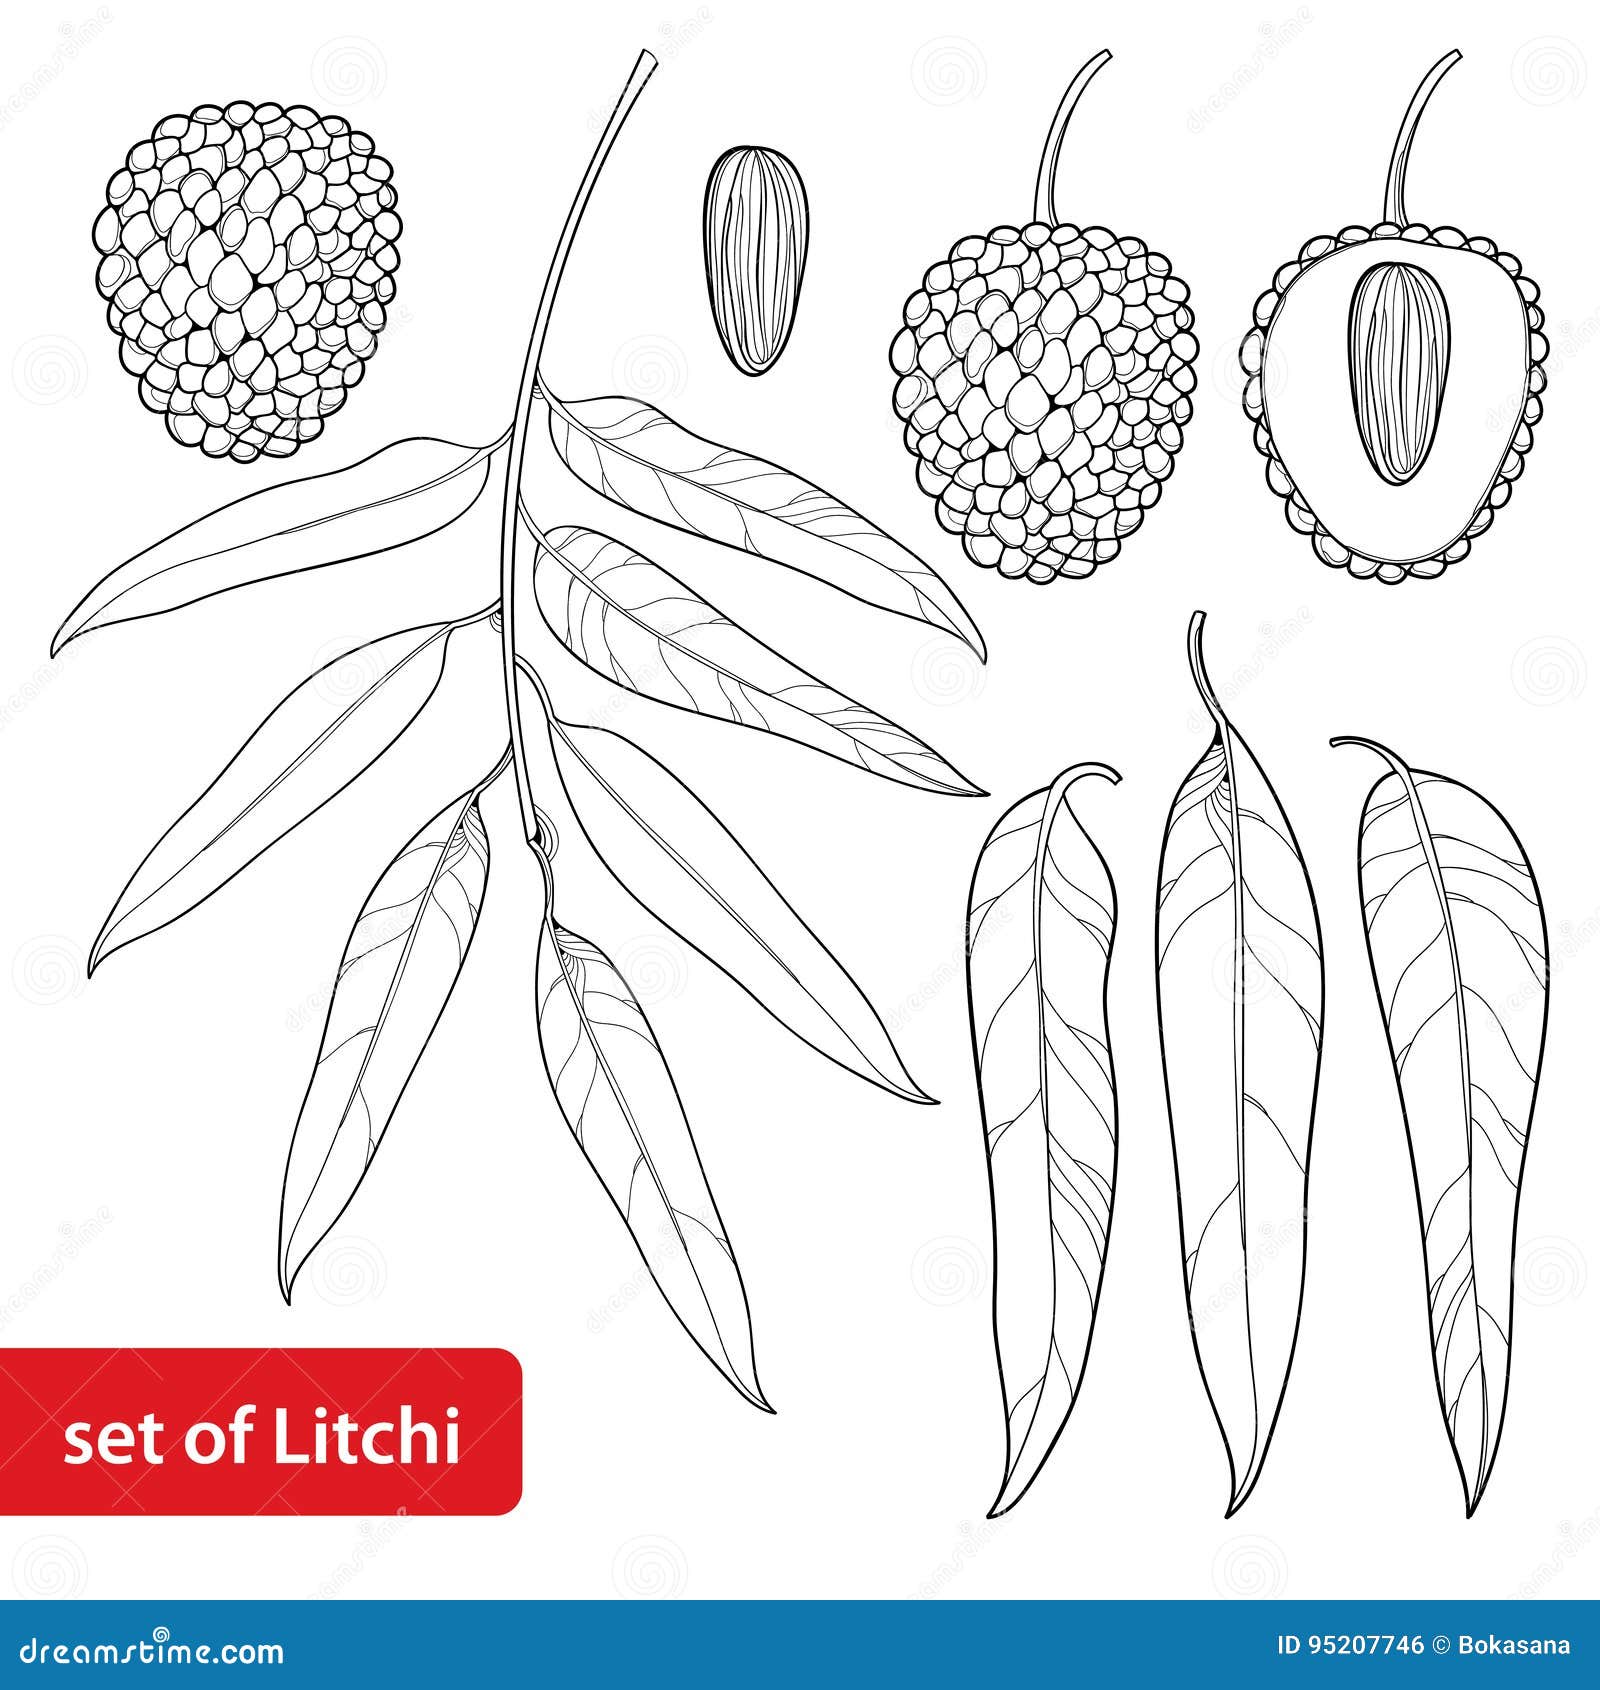 99 Litchi Branch Illustration Stock Photos and Images - 123RF